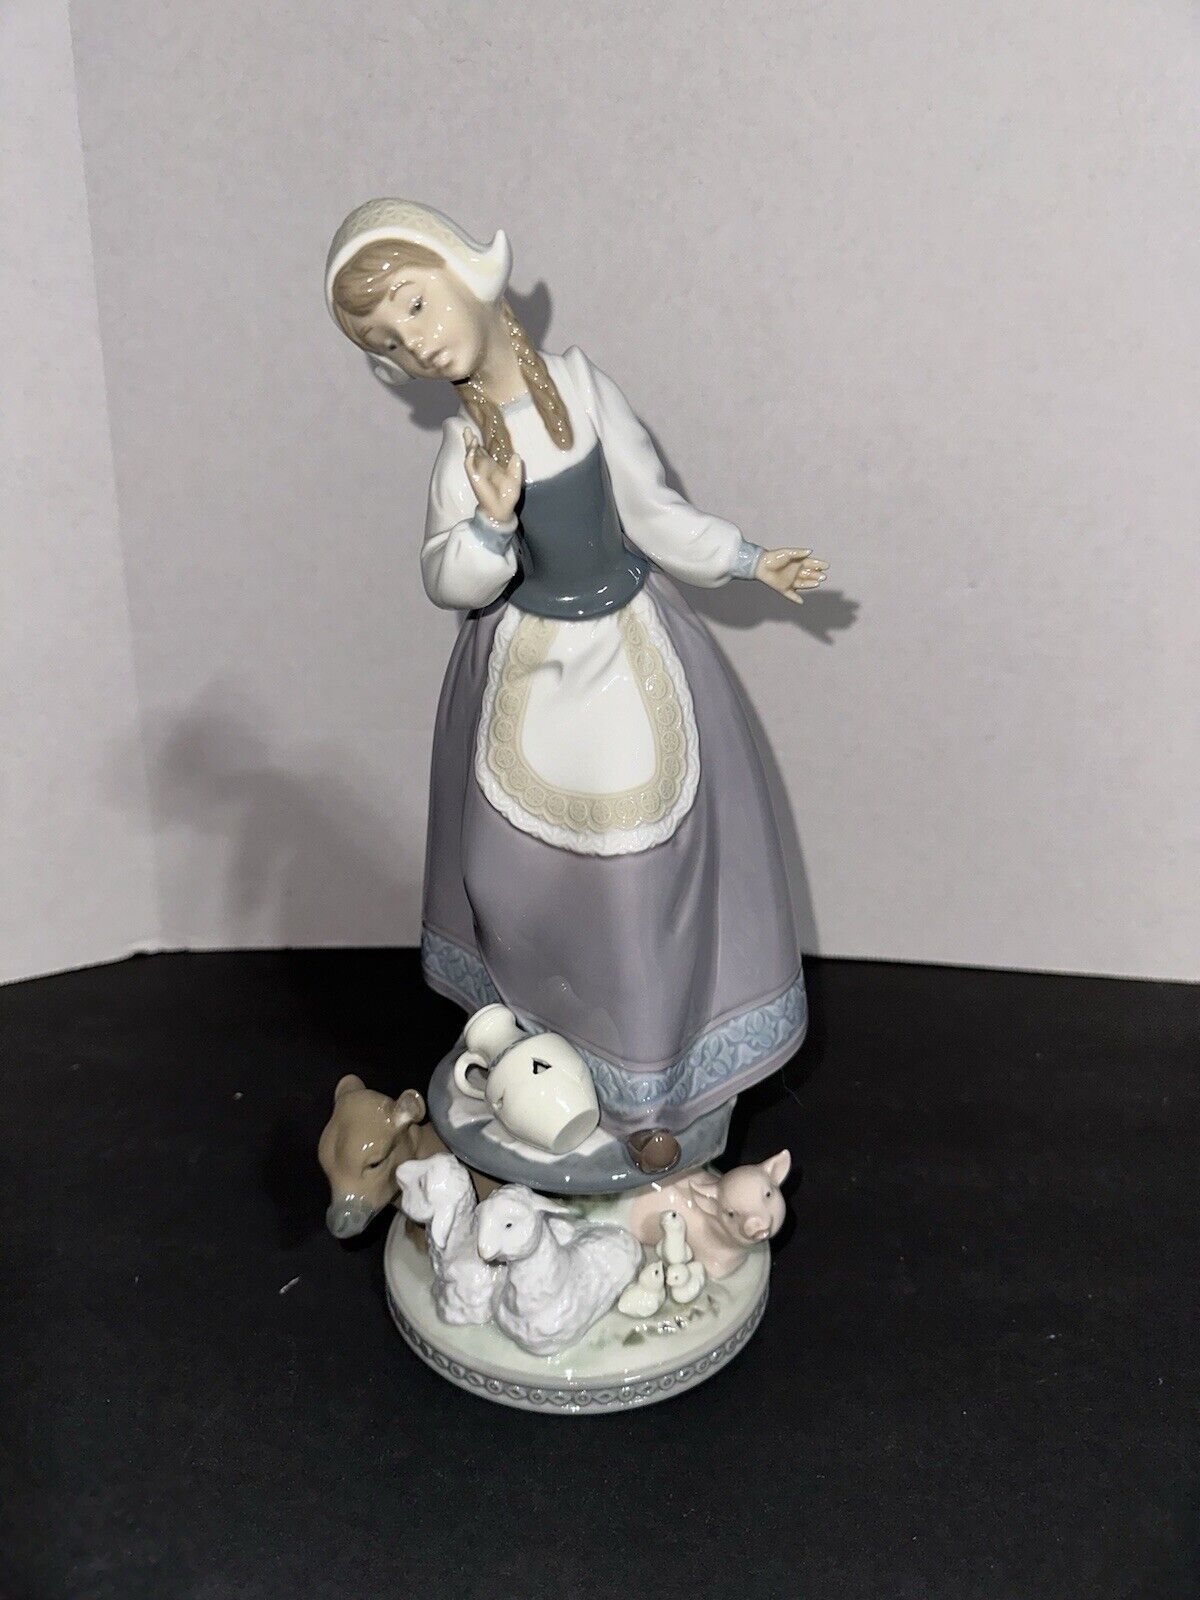 Rare Retired Lladro Milkmaid Porcelain  #5798 (no chips)